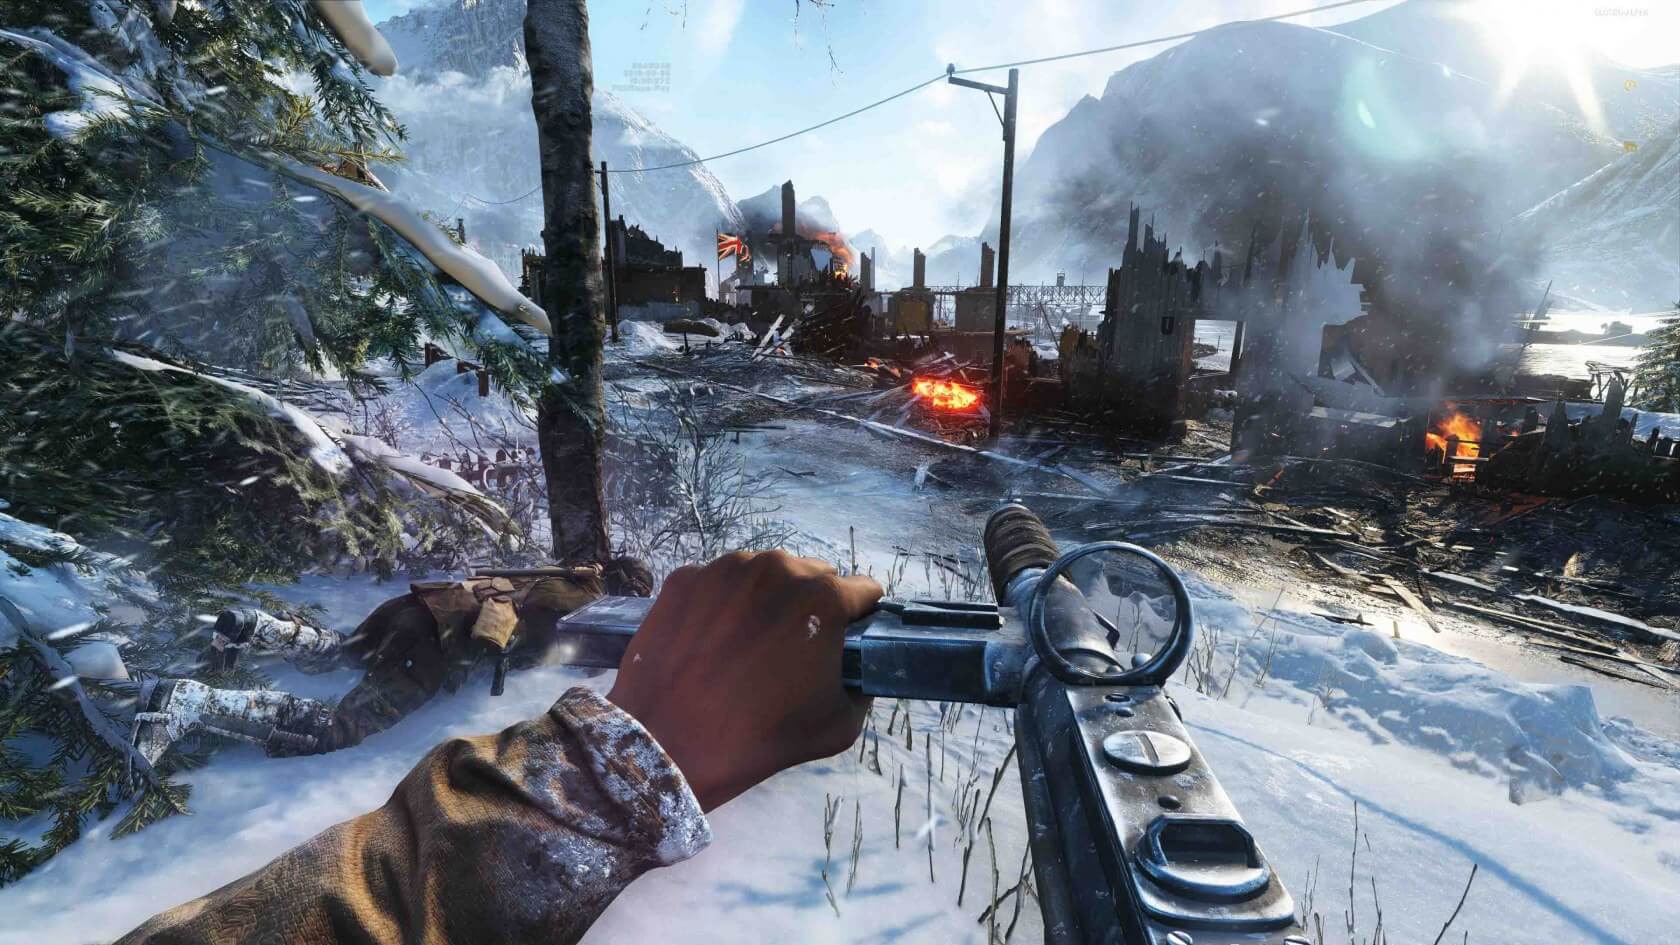 A tutorial video for Battlefield V's battle royale mode has leaked